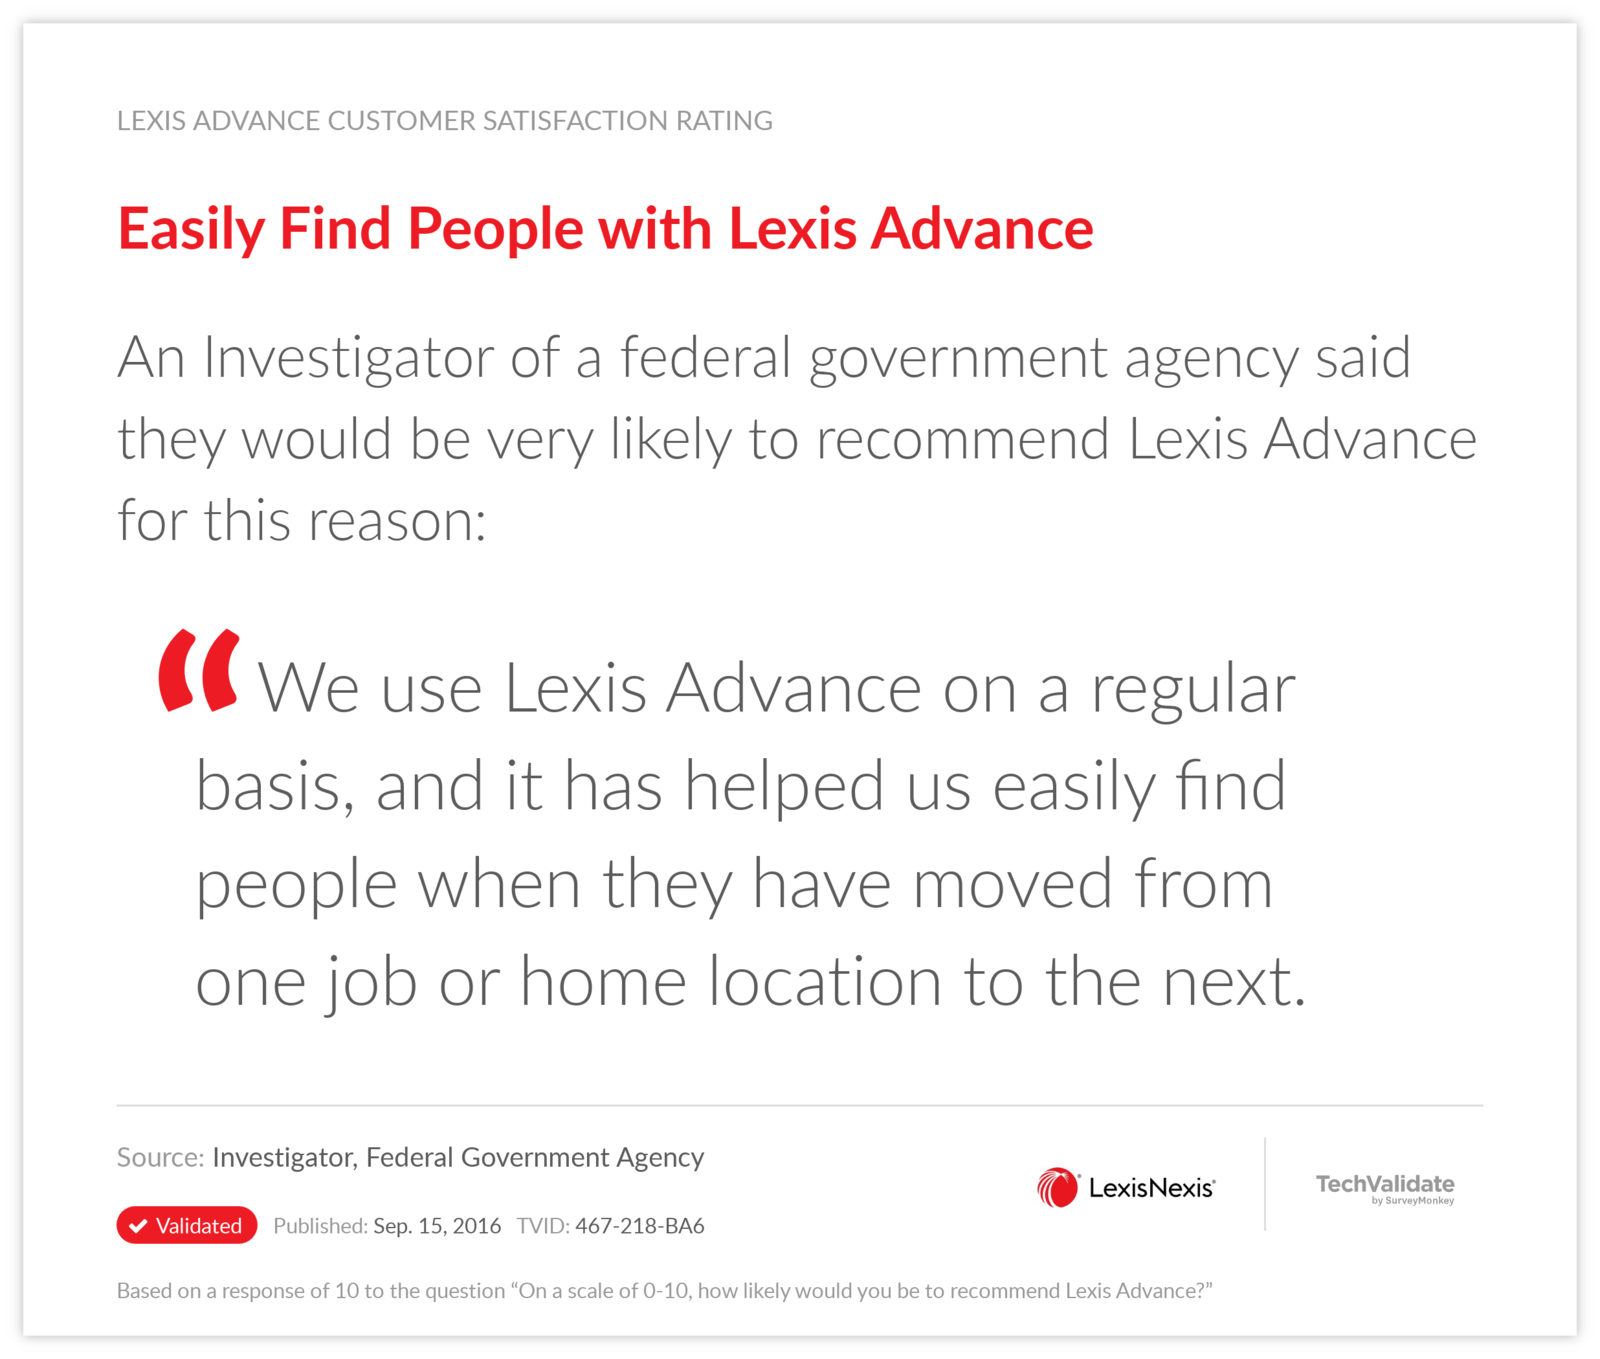 Easily Find People with Lexis Advance